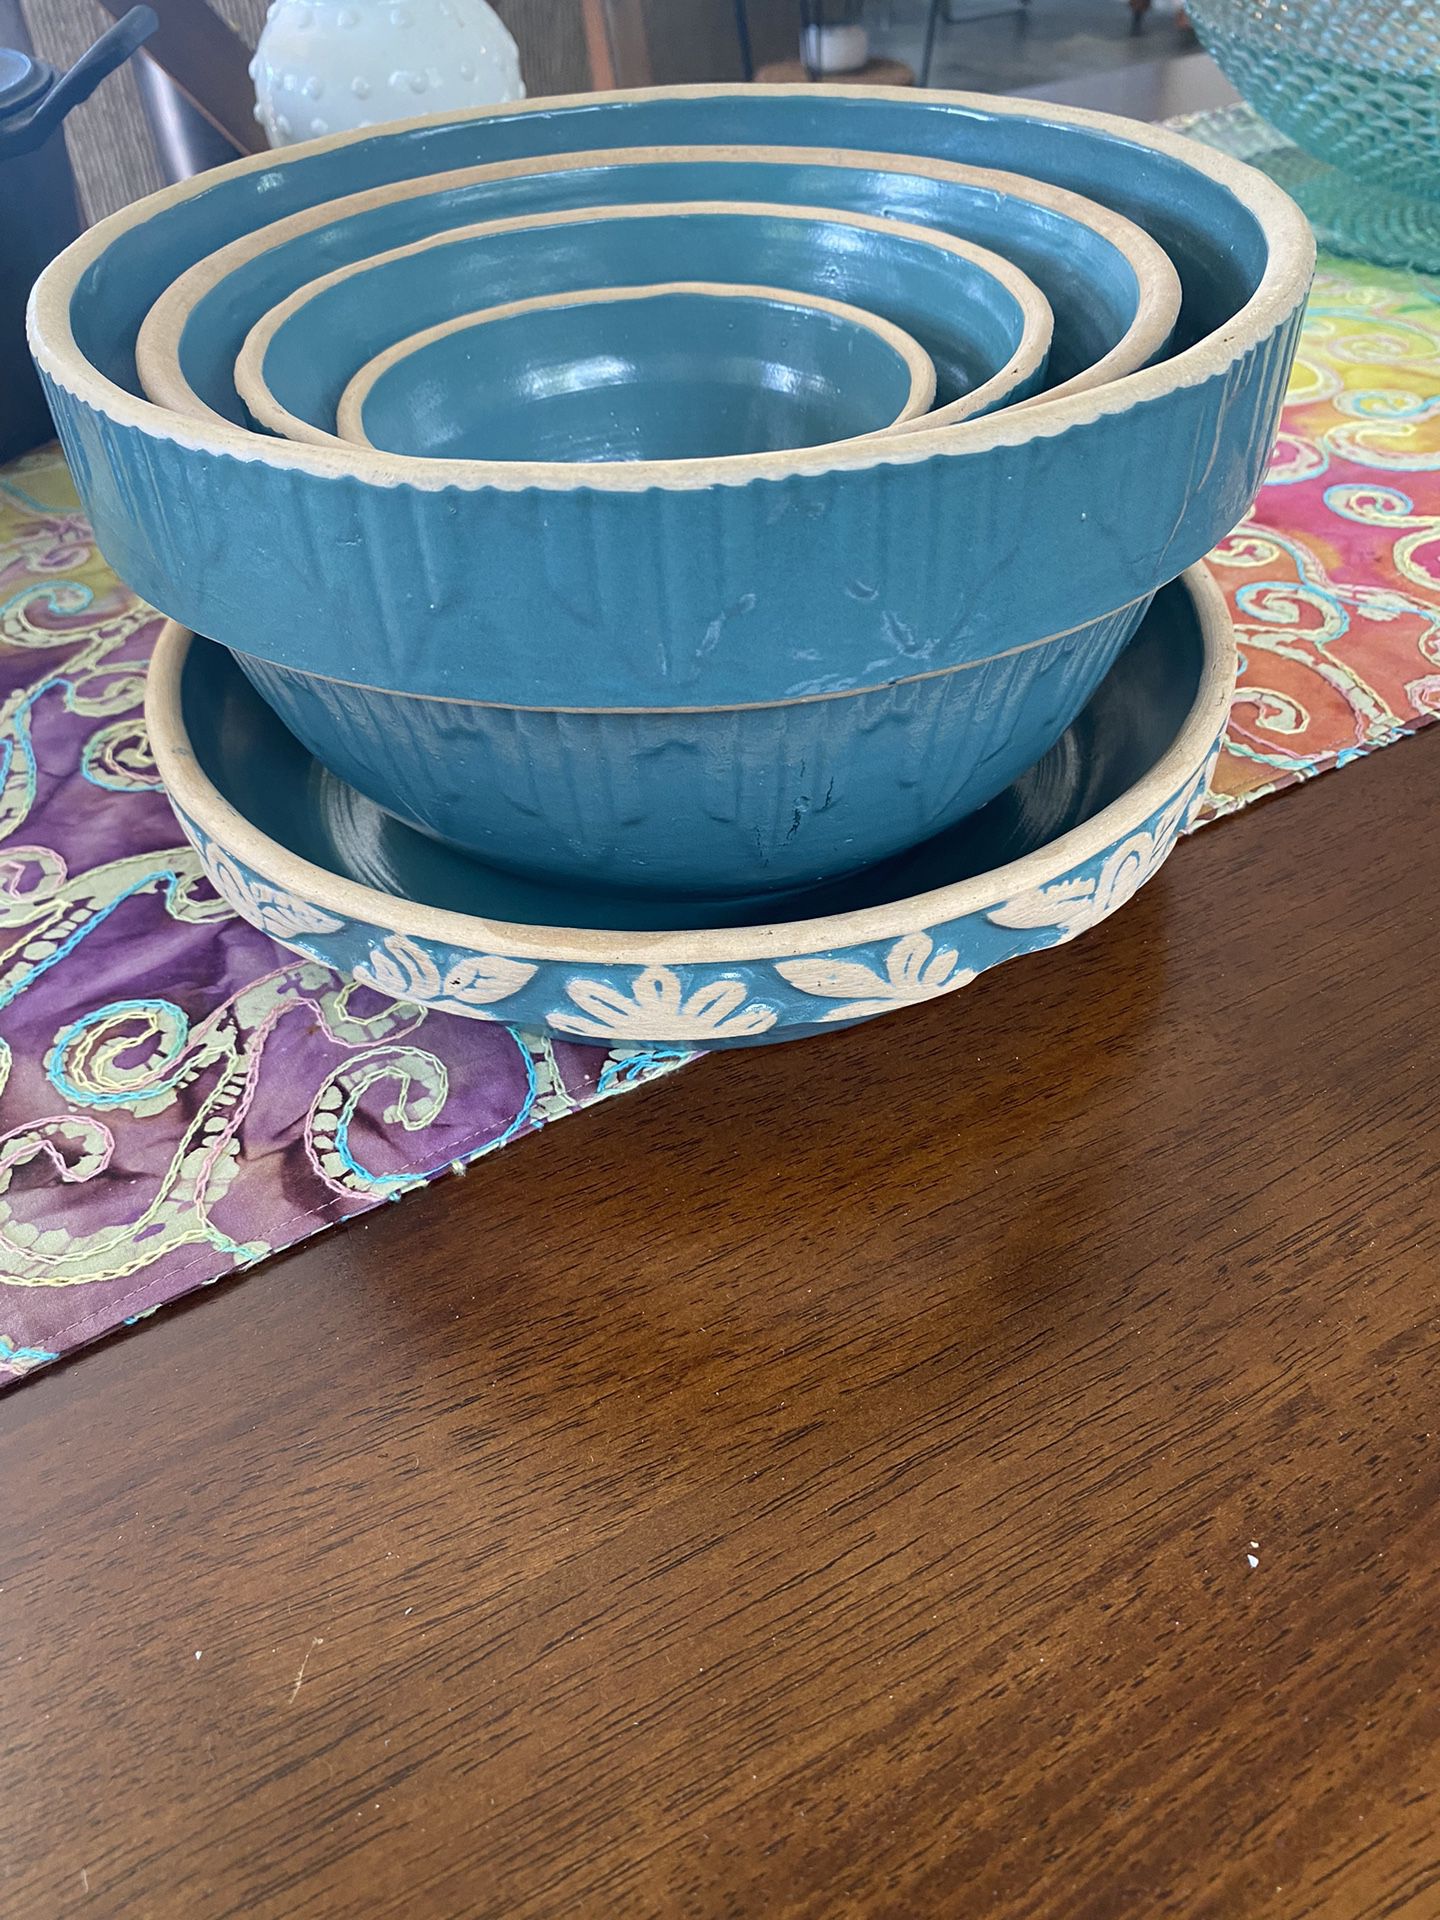 Clay City Pottery Nesting Bowls And Pie Plate. Teal